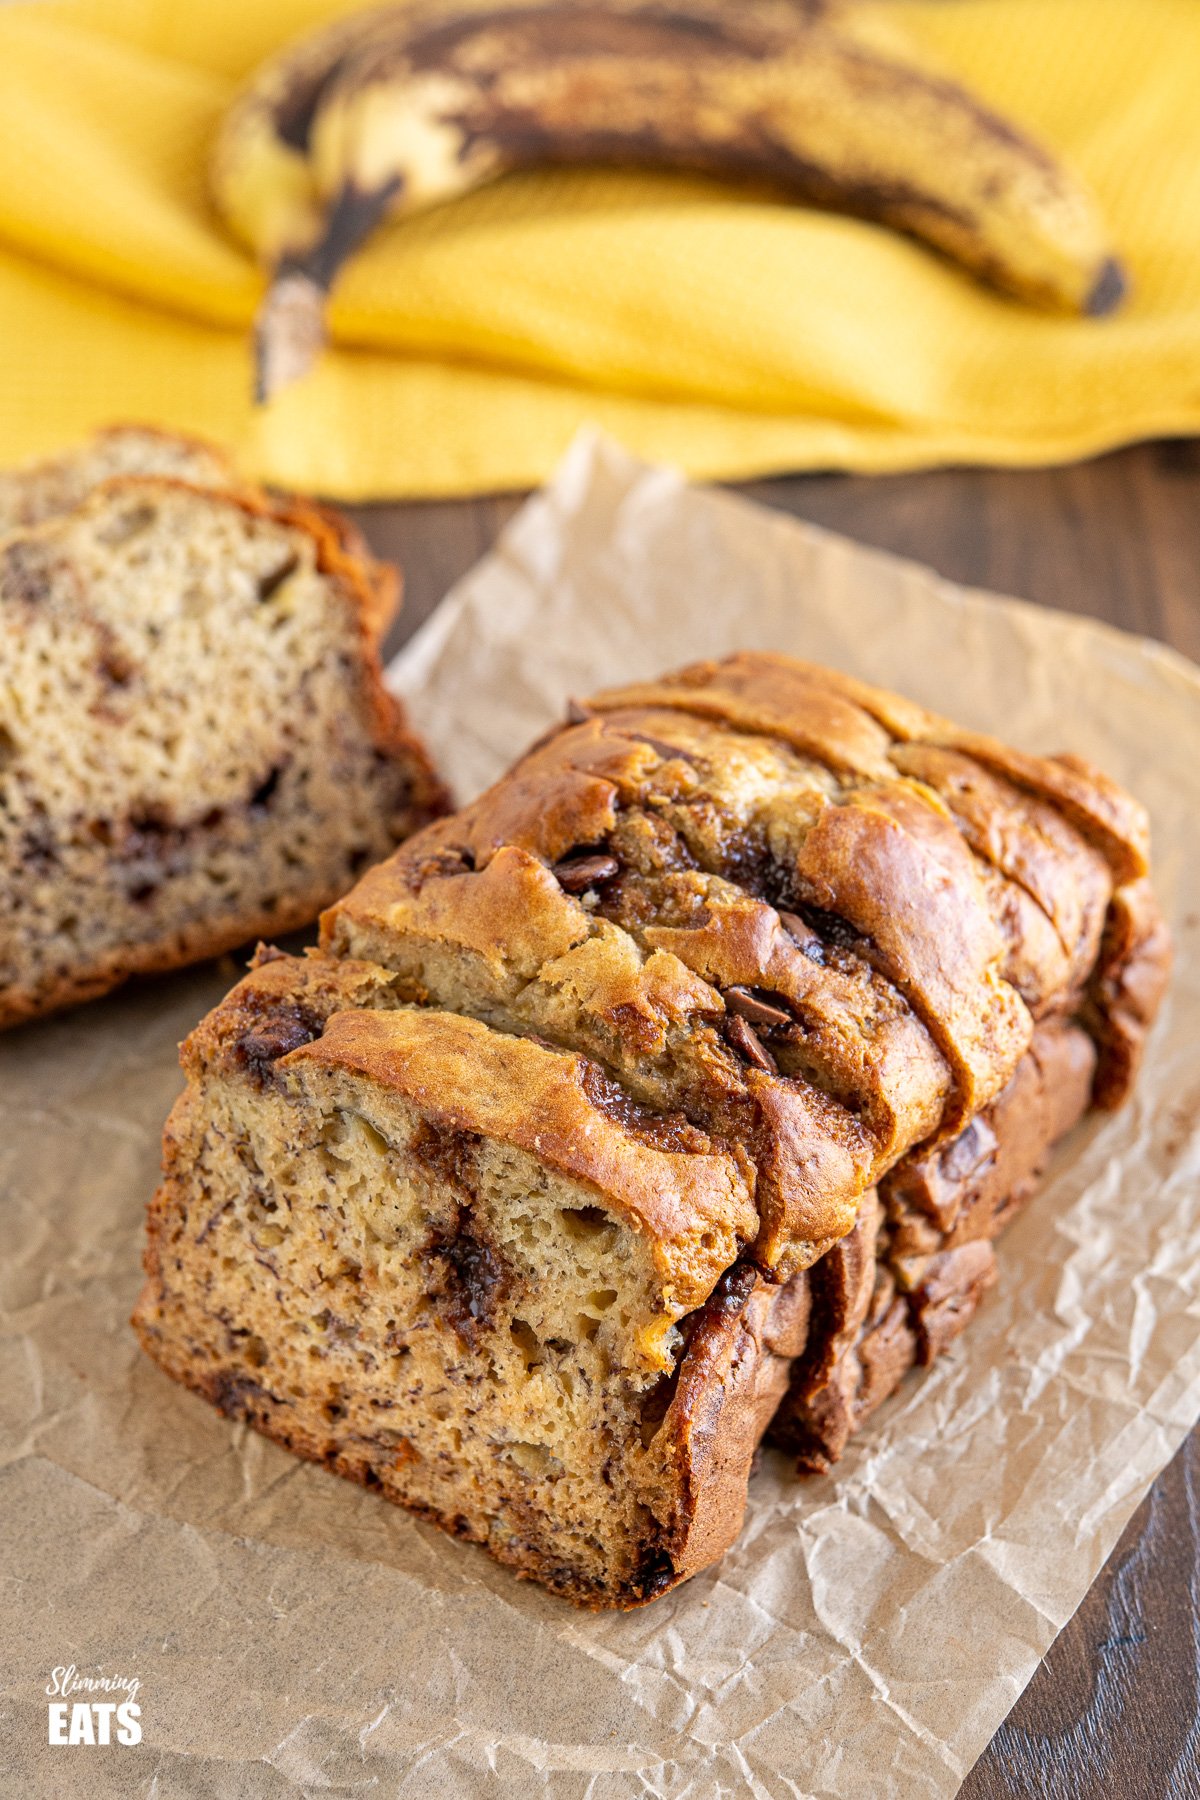 sliced Healthy Banana and Chocolate Chip Loaf on parchment paper with ripe bananas in background on yellow tea towel